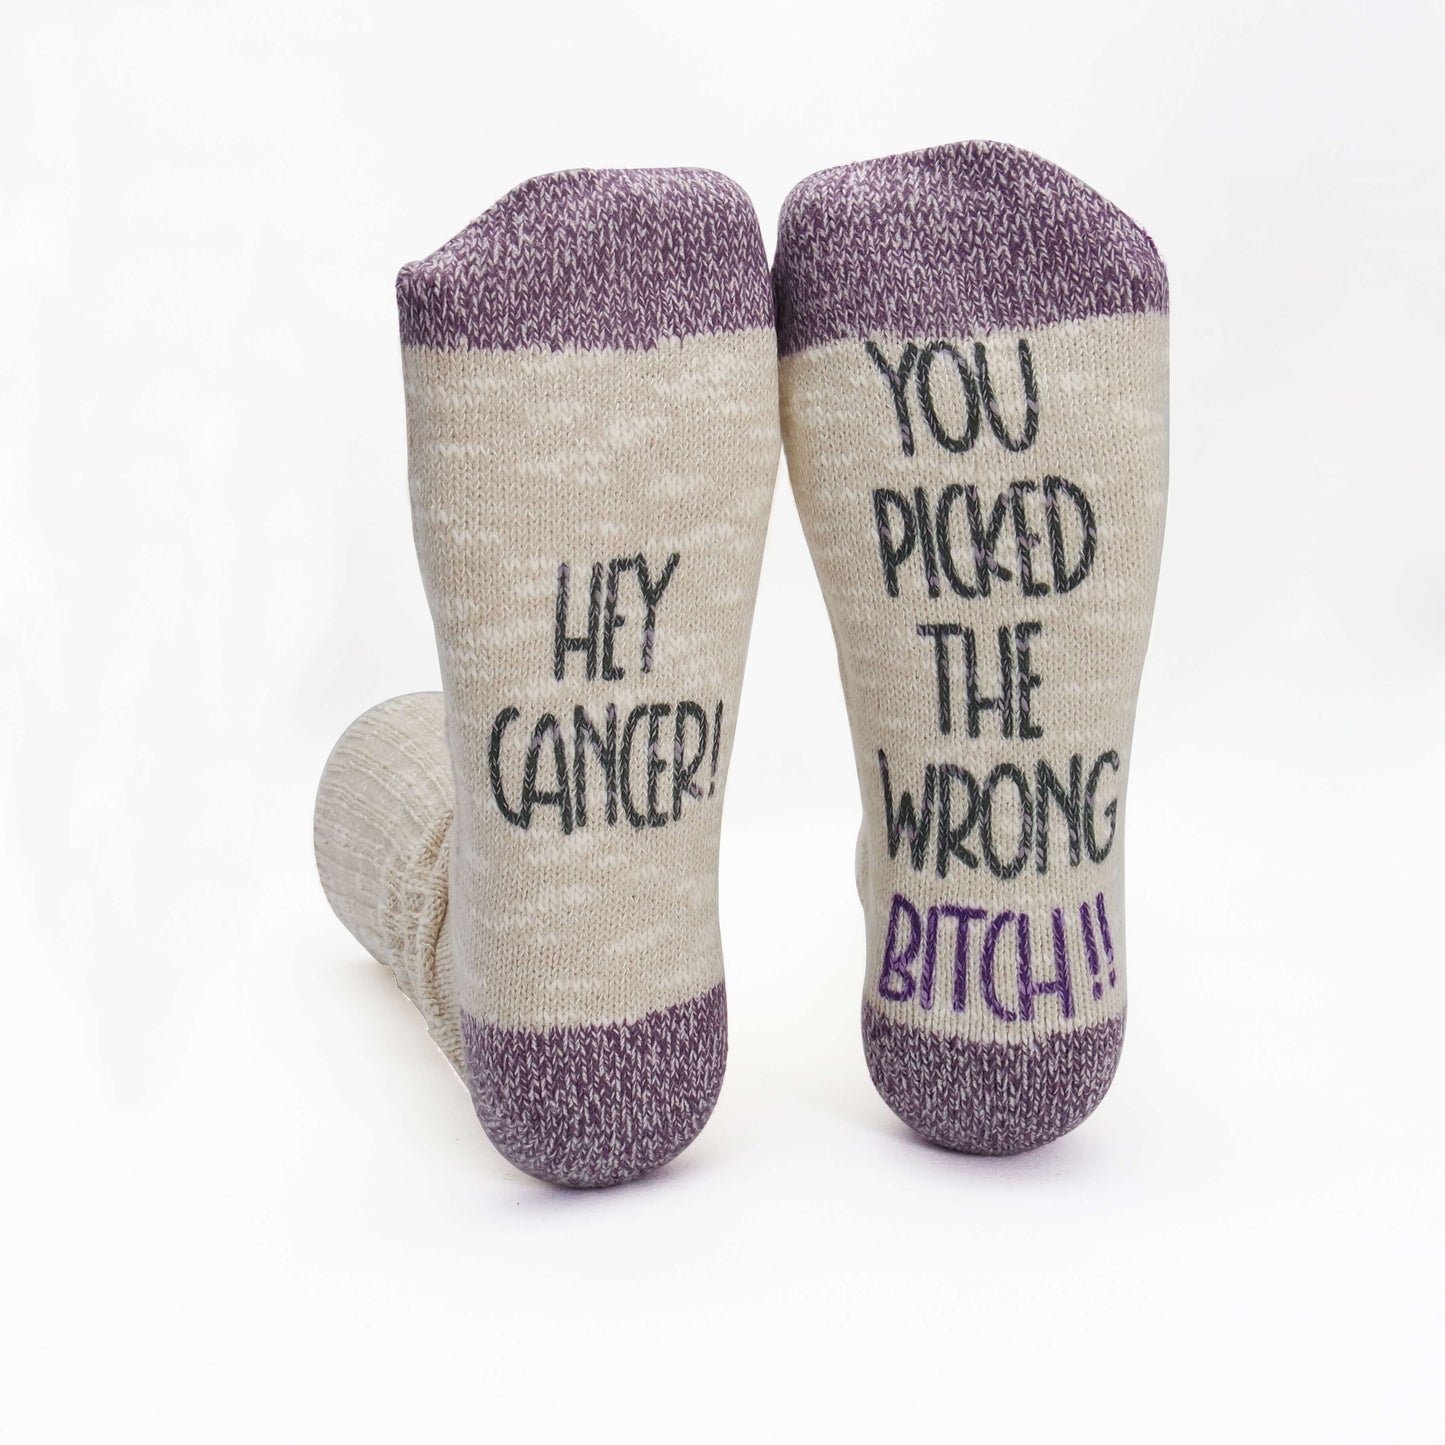 Women's Dear Cancer, You Picked the Wrong Bitch" Cancer Socks